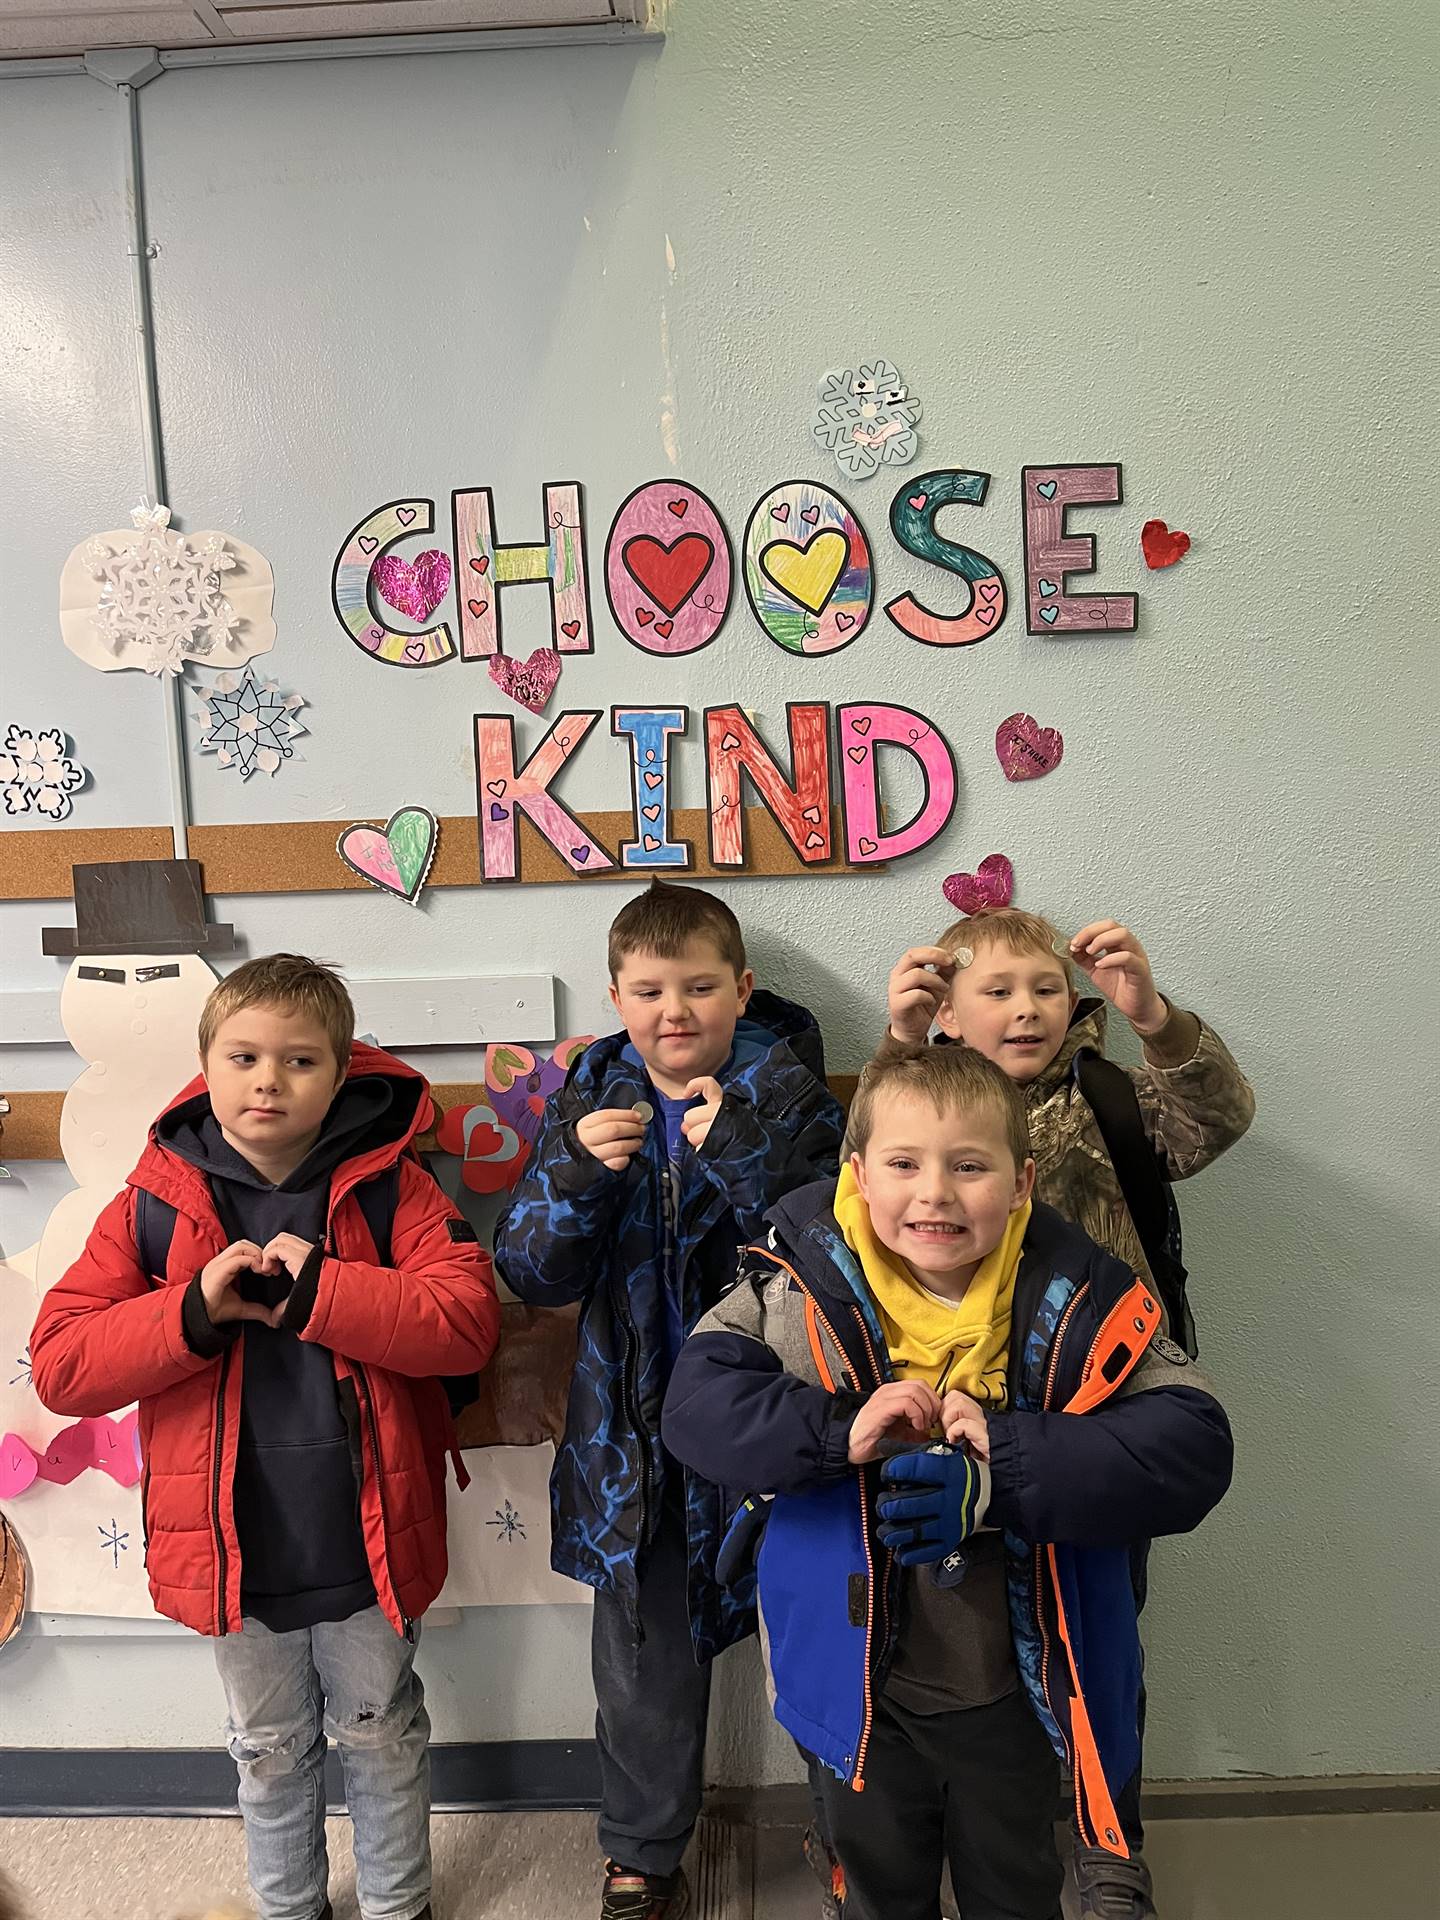 kids making a heart sign with hands and a "choose Kind" background.